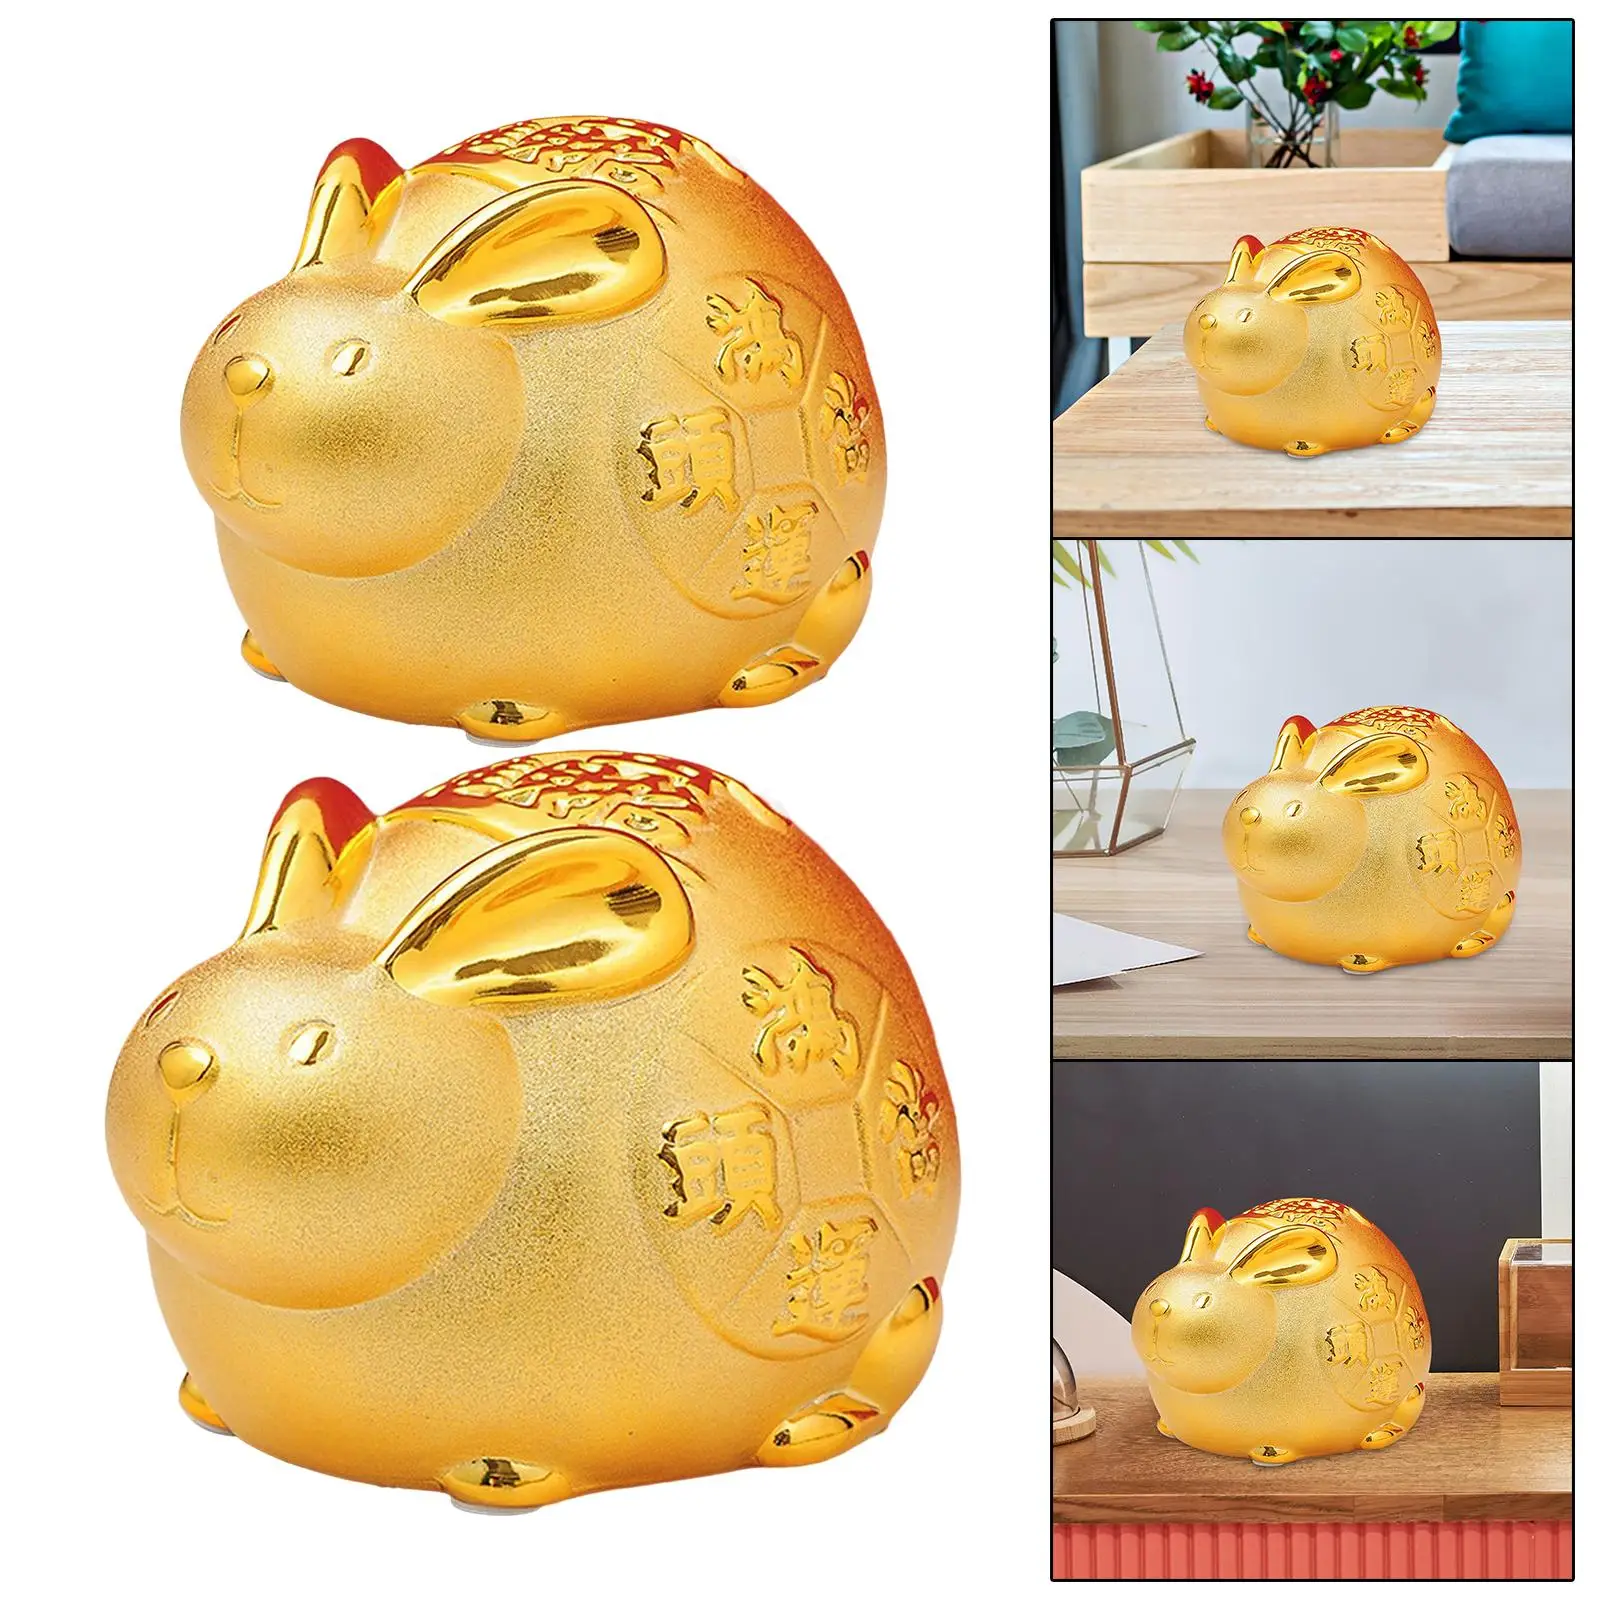 Lucky Rabbit Piggy Bank Animal Figurines Statue for Business Easter Gifts